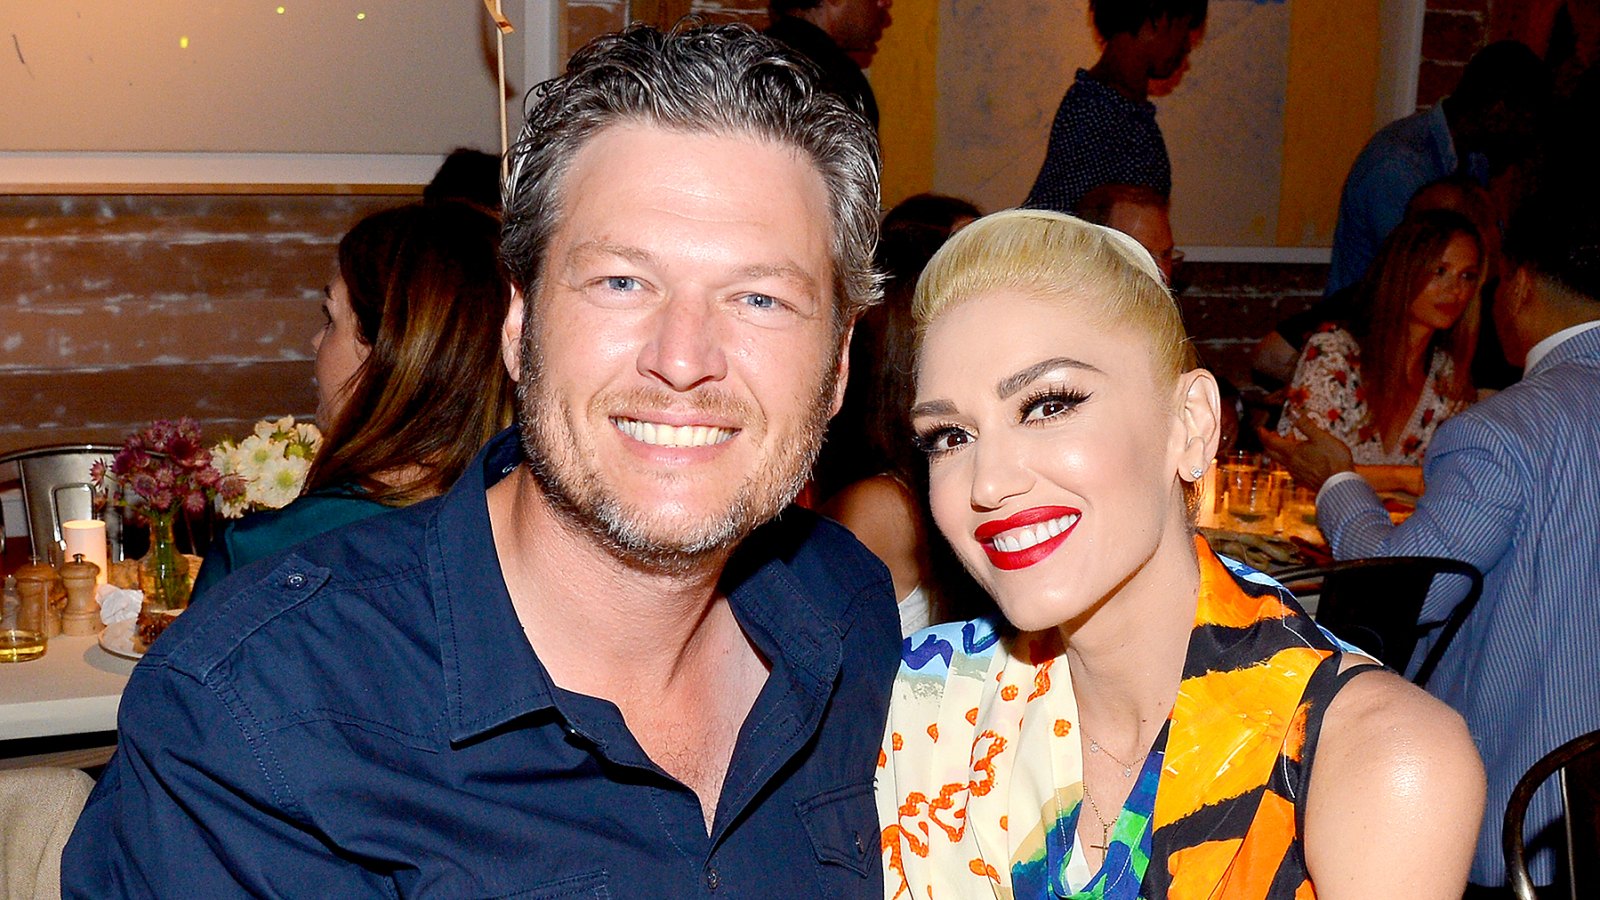 Blake Shelton and Gwen Stefani attend the Apollo in the Hamptons 2016 party at The Creeks on August 20, 2016 in East Hampton, New York.